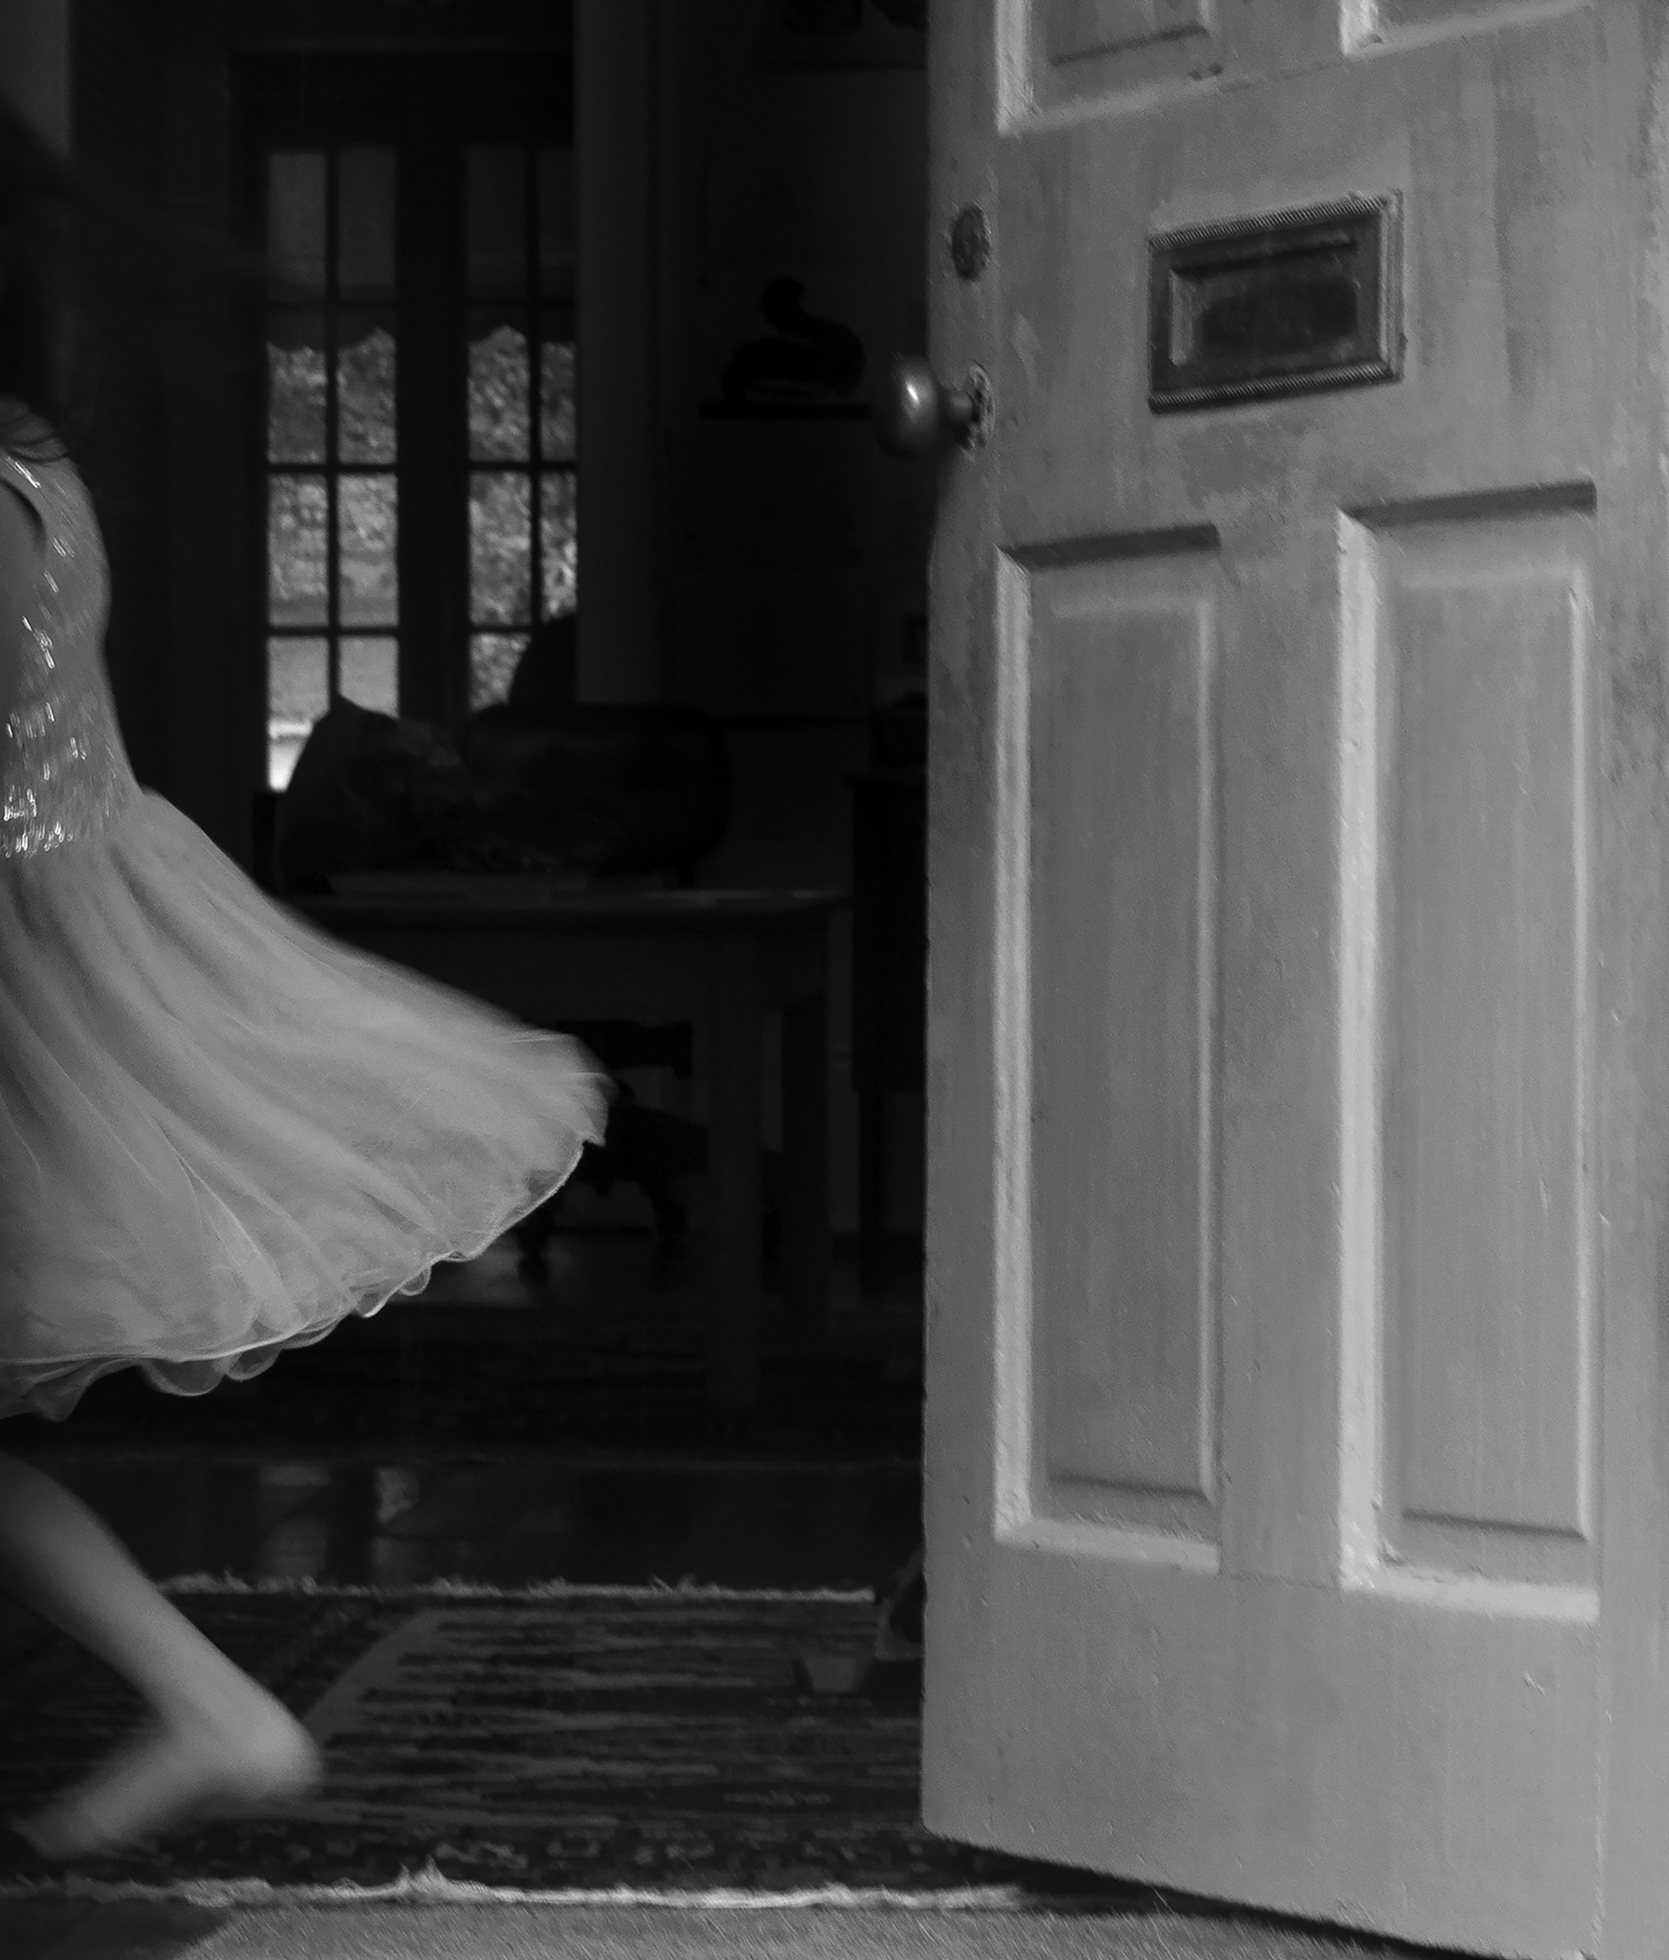 A barefoot girl has dashed into a home through the front door leaving it open on the right. She is moving to the left and a glimpse of her white dress with ruffles on the bottom and sparkles on the top back is captured as she disappears inside.